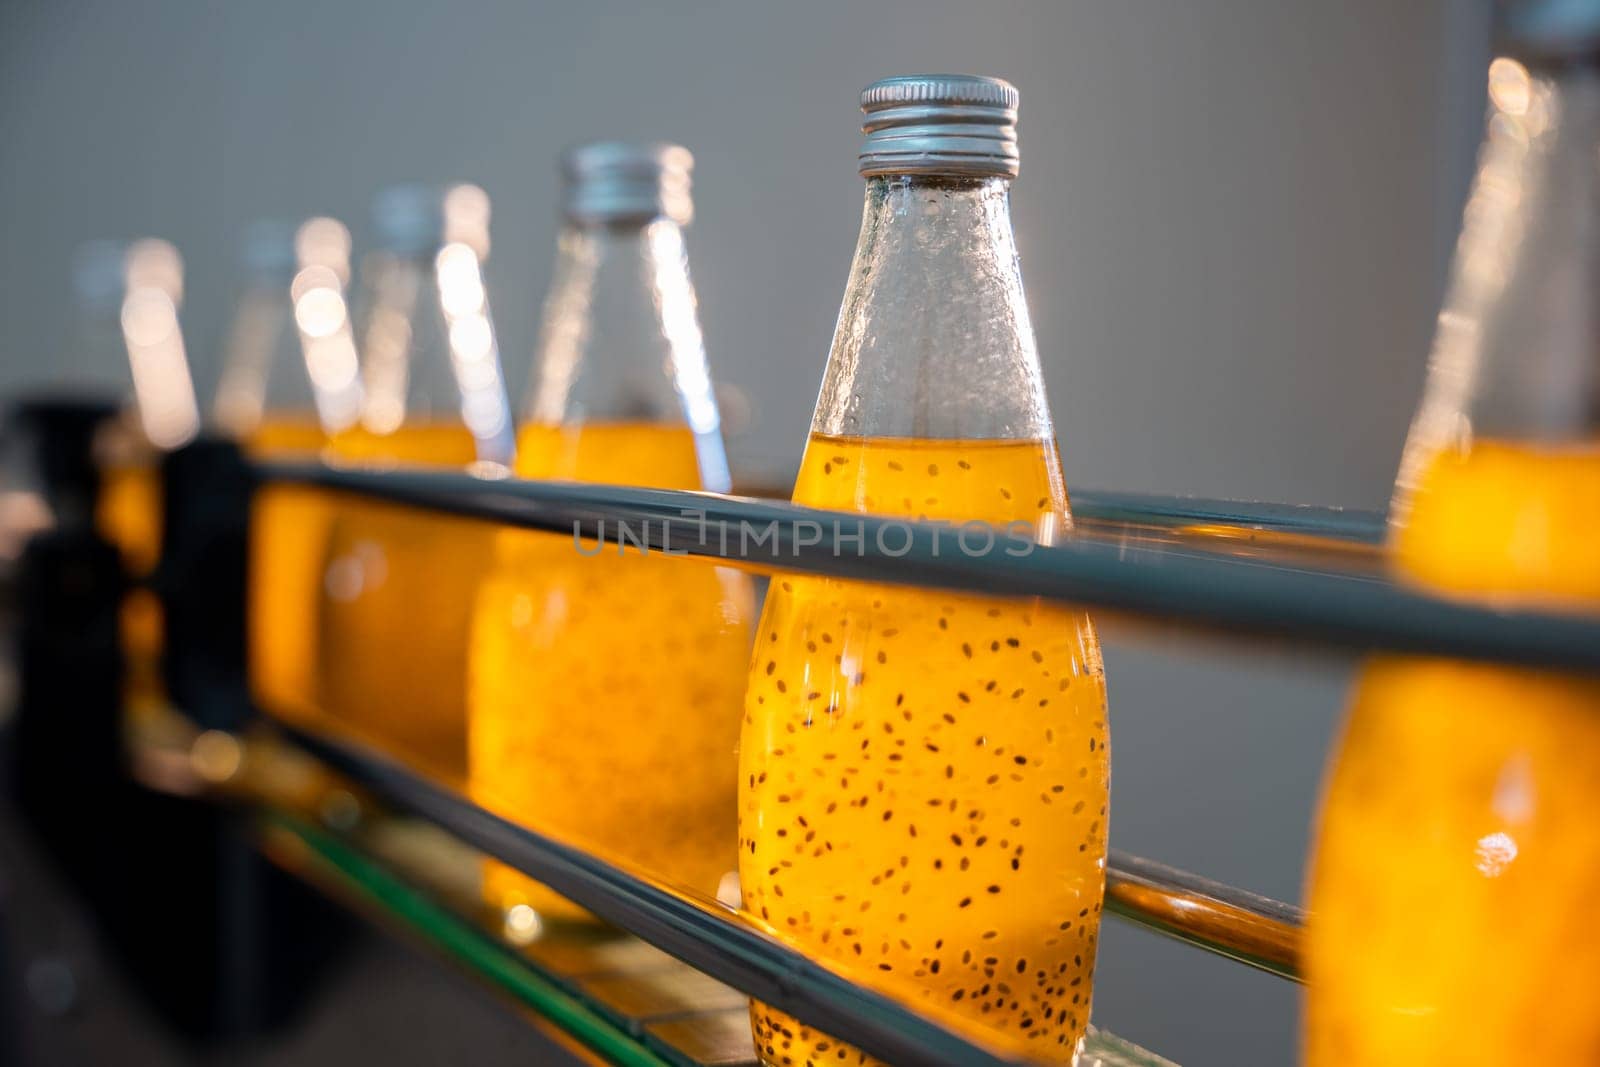 Basil or chia seed beverages with pomegranate undergo quality filling into transparent bottles by Sorapop